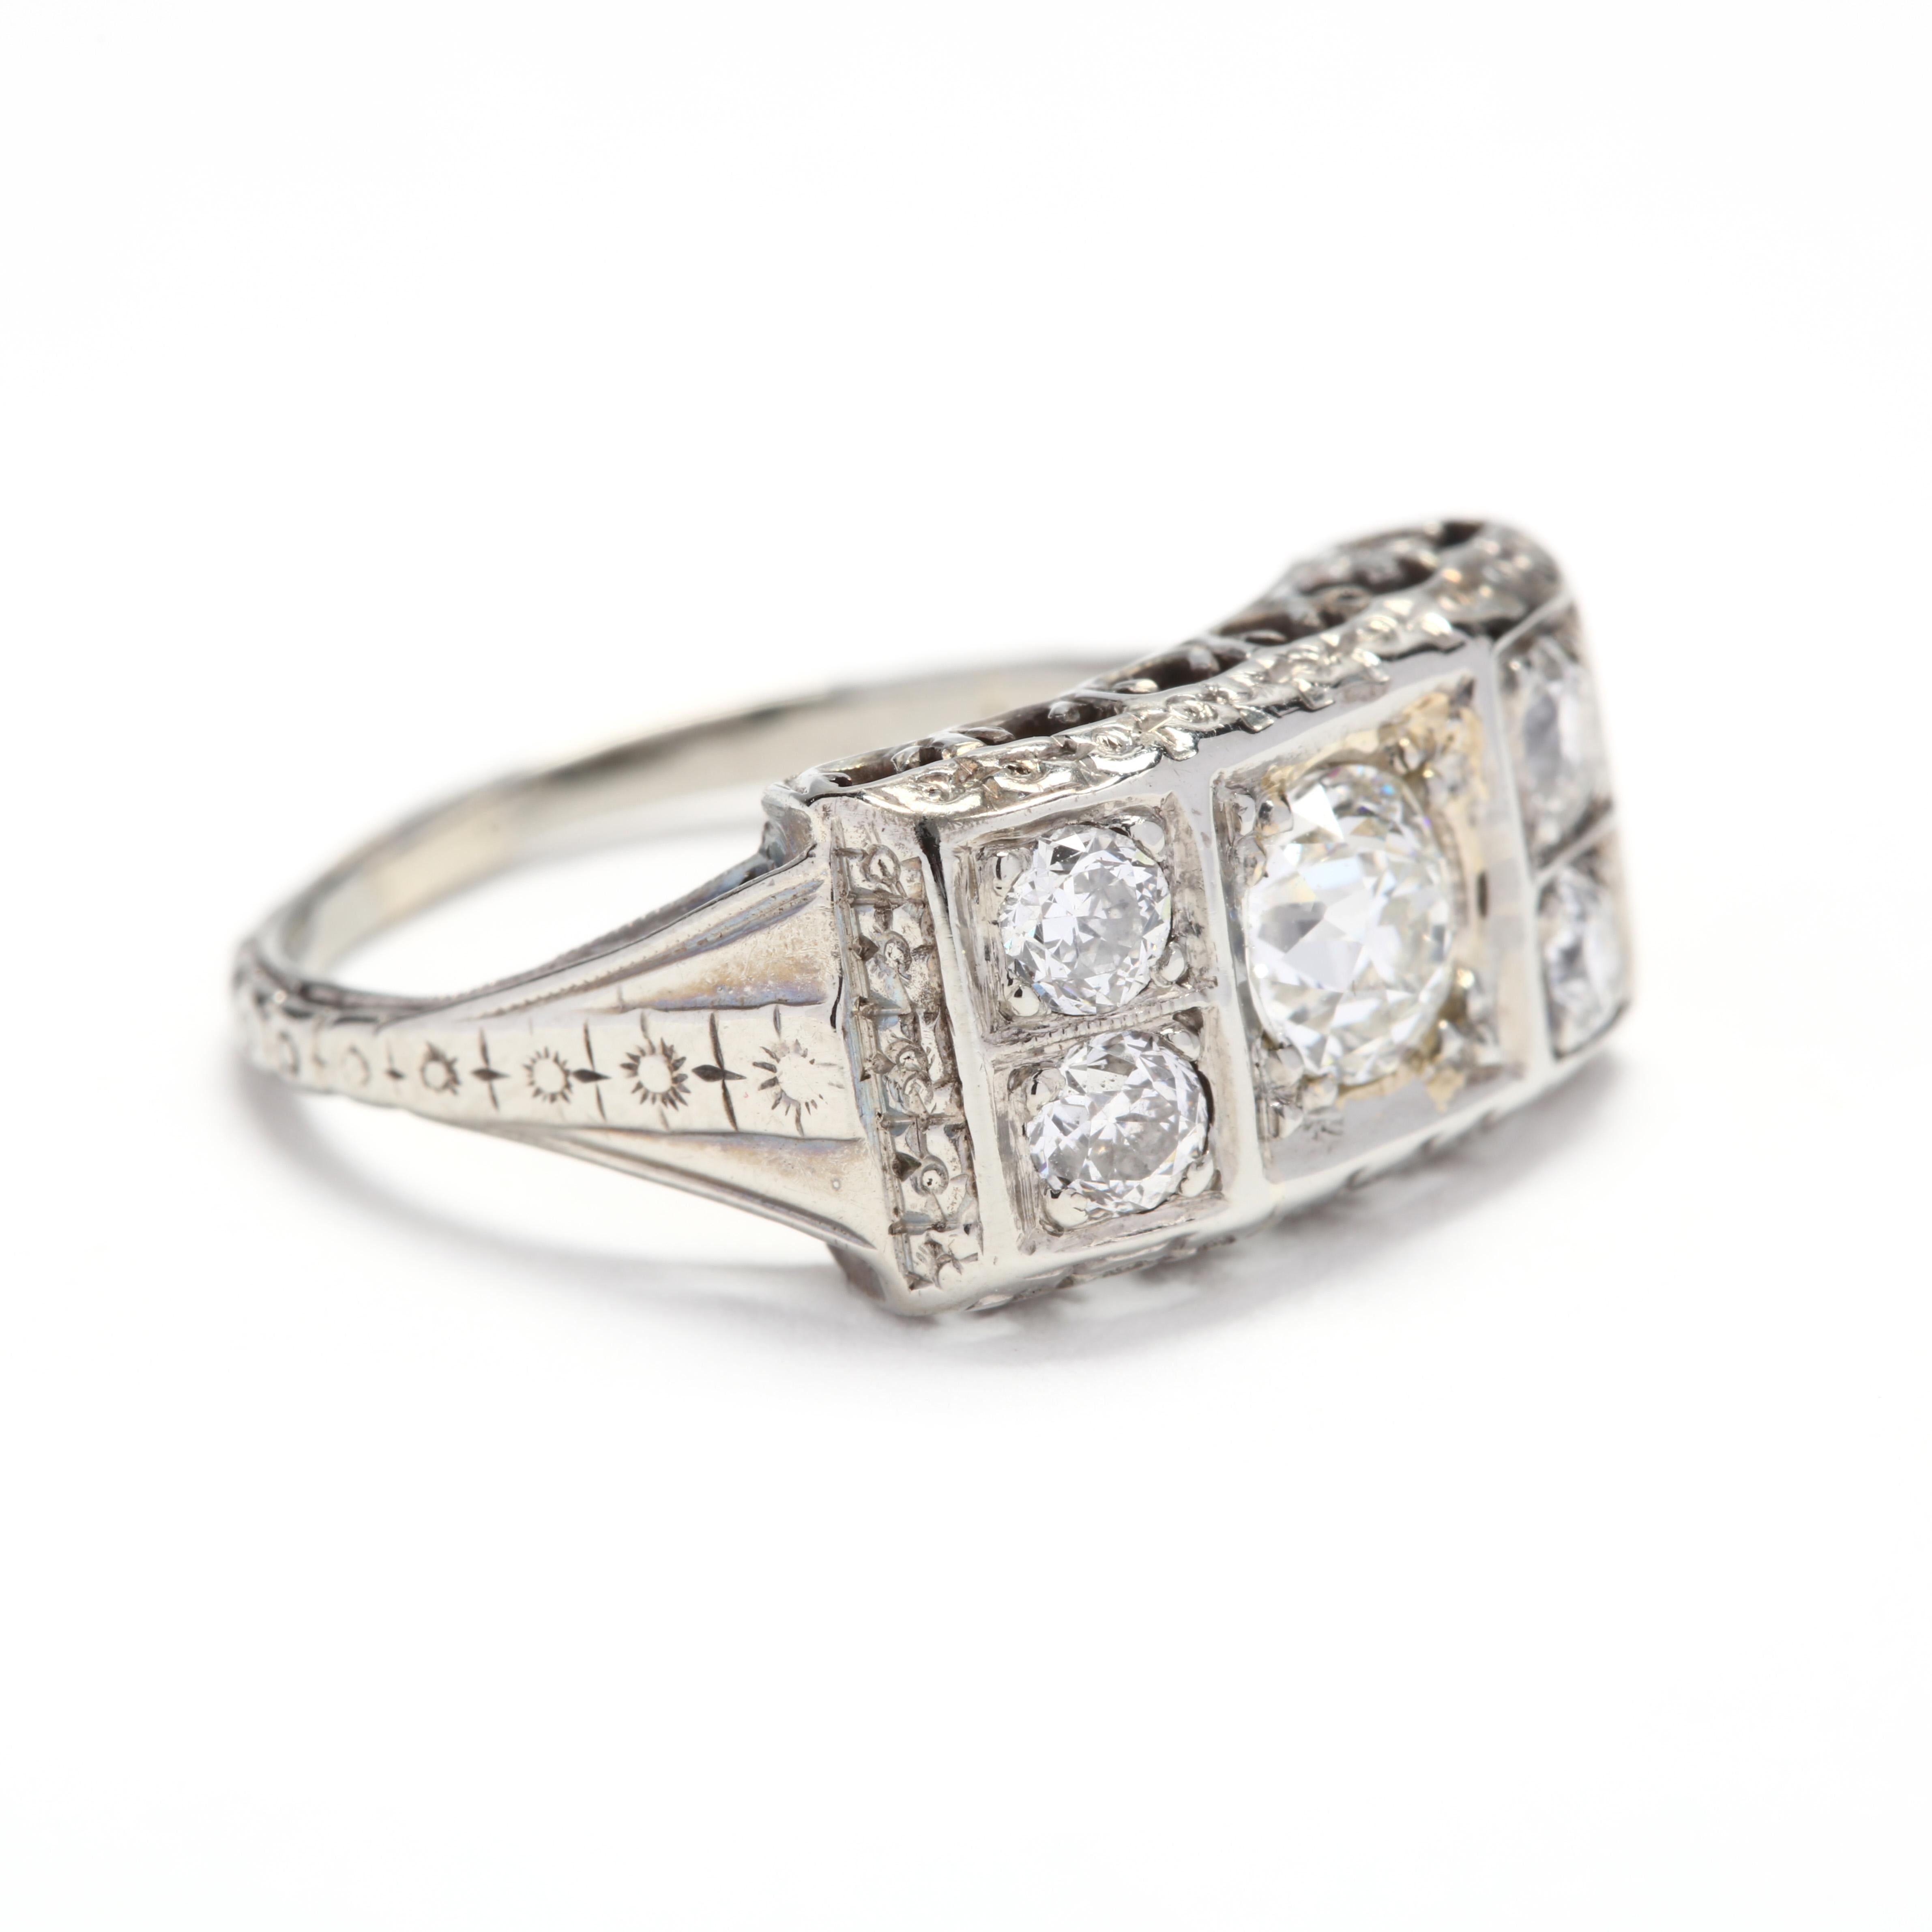 Art Deco 18 karat white gold horizontal, rectangular ring with a bead set old european cut diamond center stone weighing .54 carat, with two old european cut diamonds on either side and orange blossom floral engraving.



Center Diamond

- old